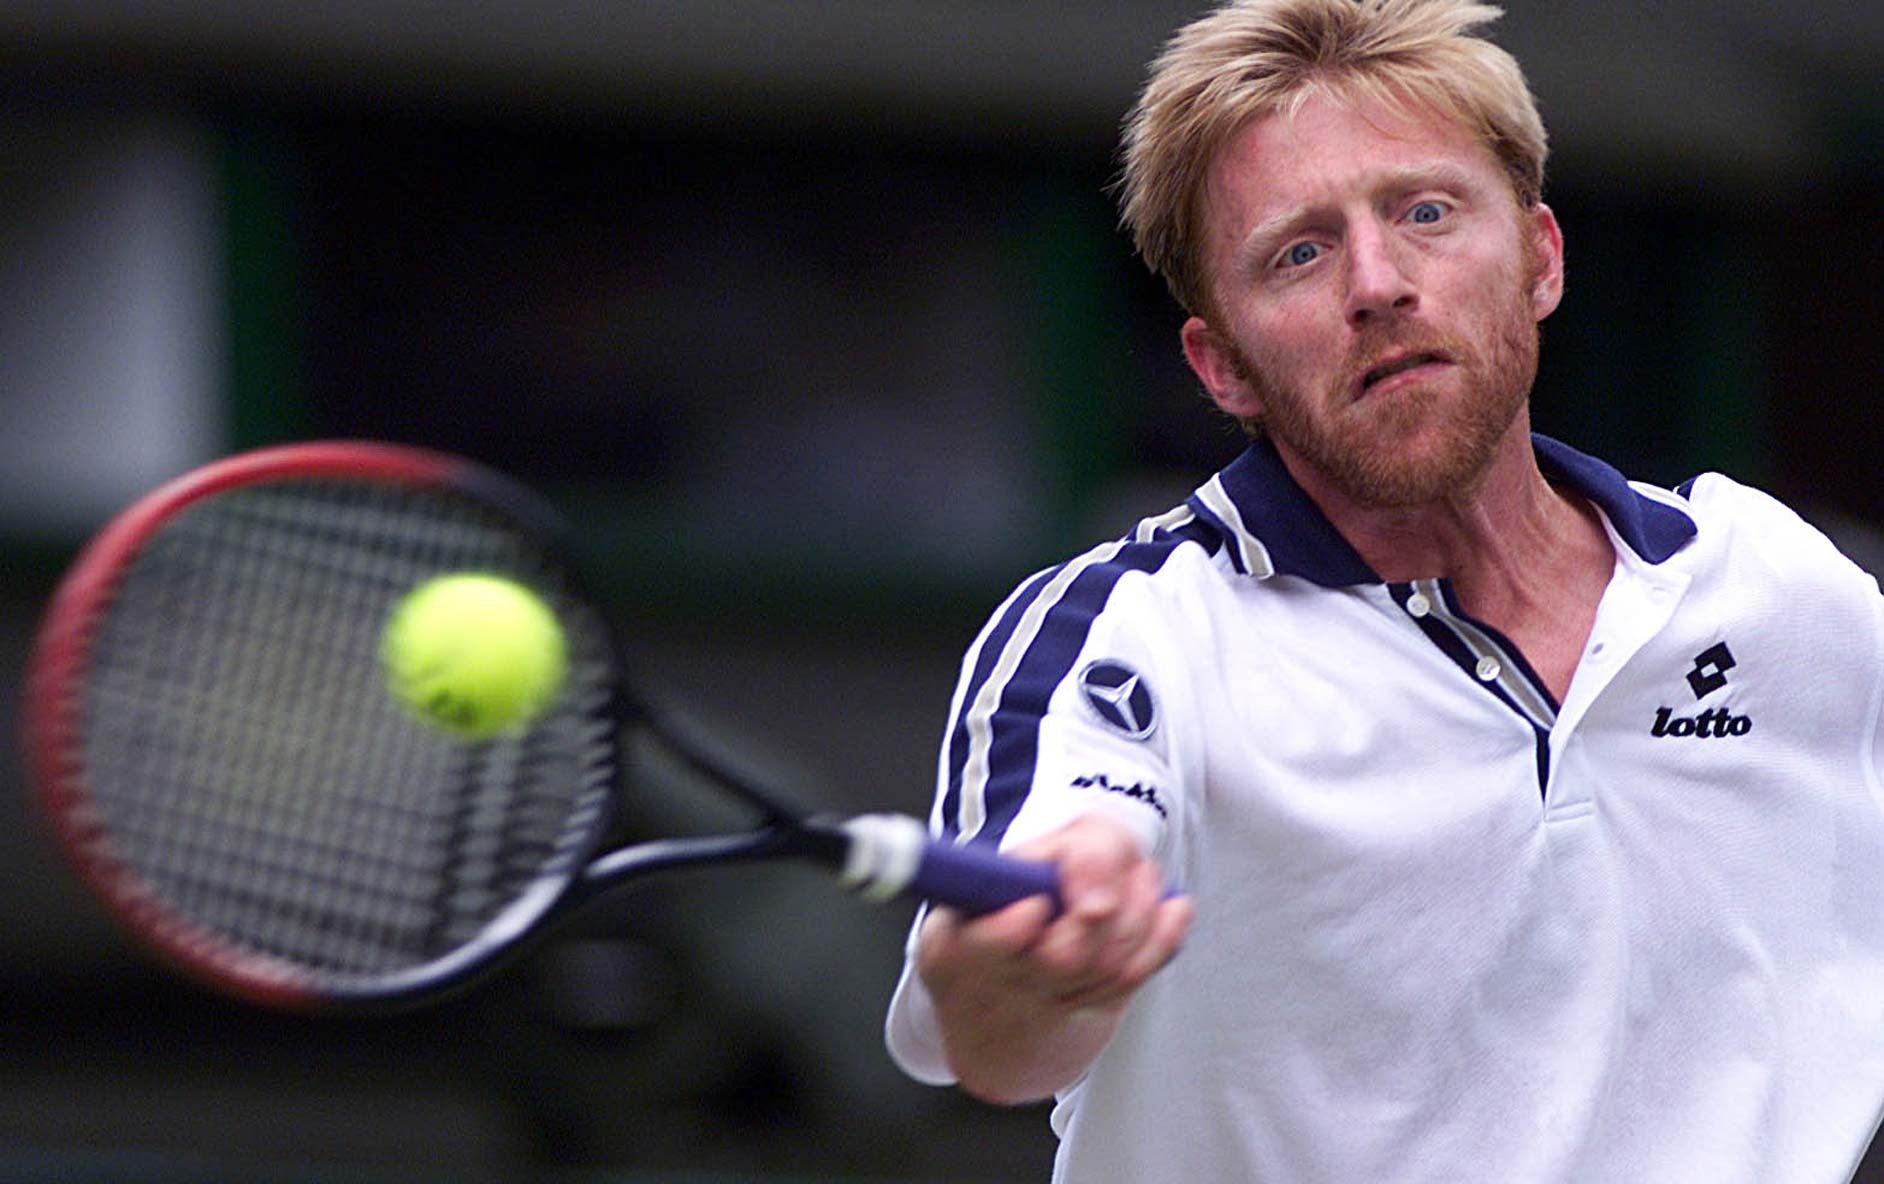 The life of former world tennis number 1 Boris Becker | The Independent